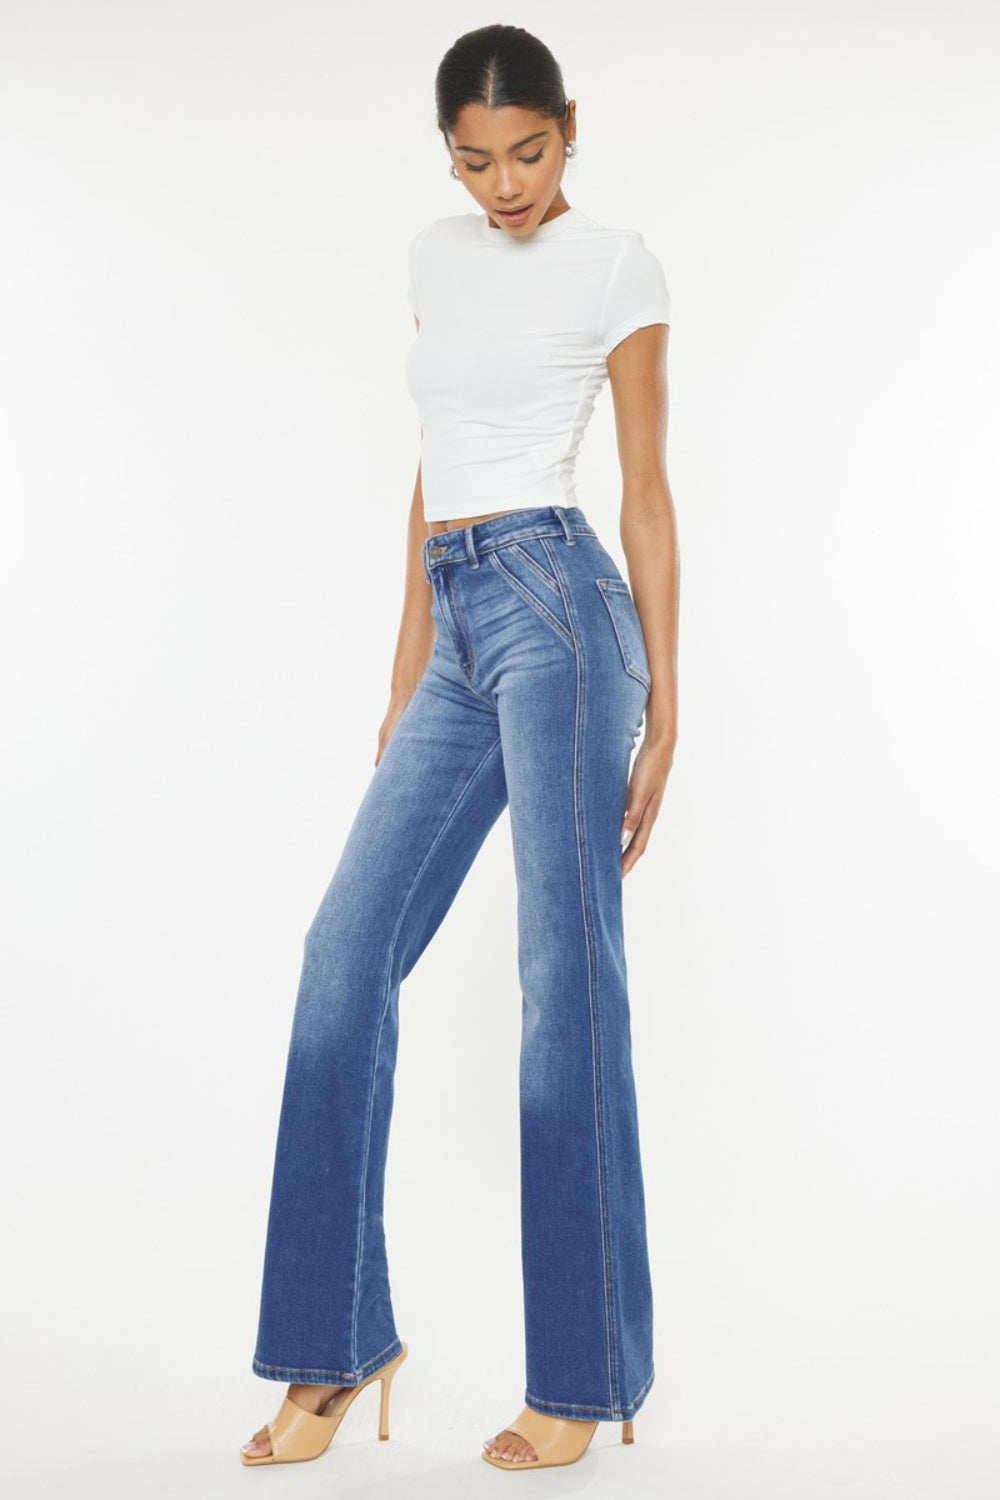 Comfortable and stylish wide-leg blue jeans